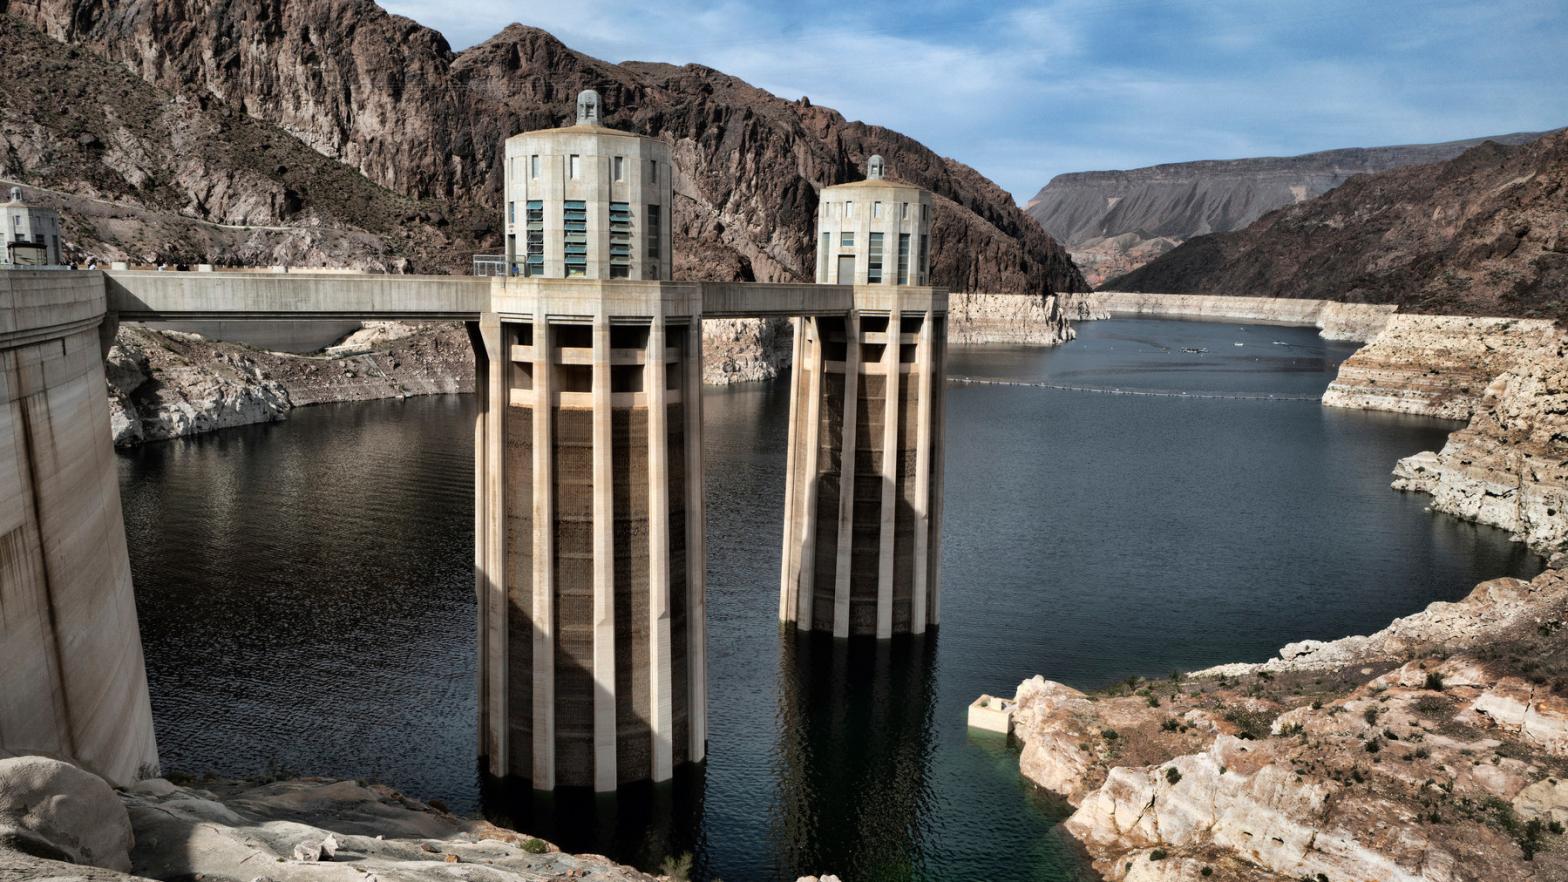 A bathtub ring of light minerals shows the high water mark of the reservoir which has shrunk to its lowest point on the Colorado River, as seen from the Hoover Dam. (Photo: Richard Vogel, AP)